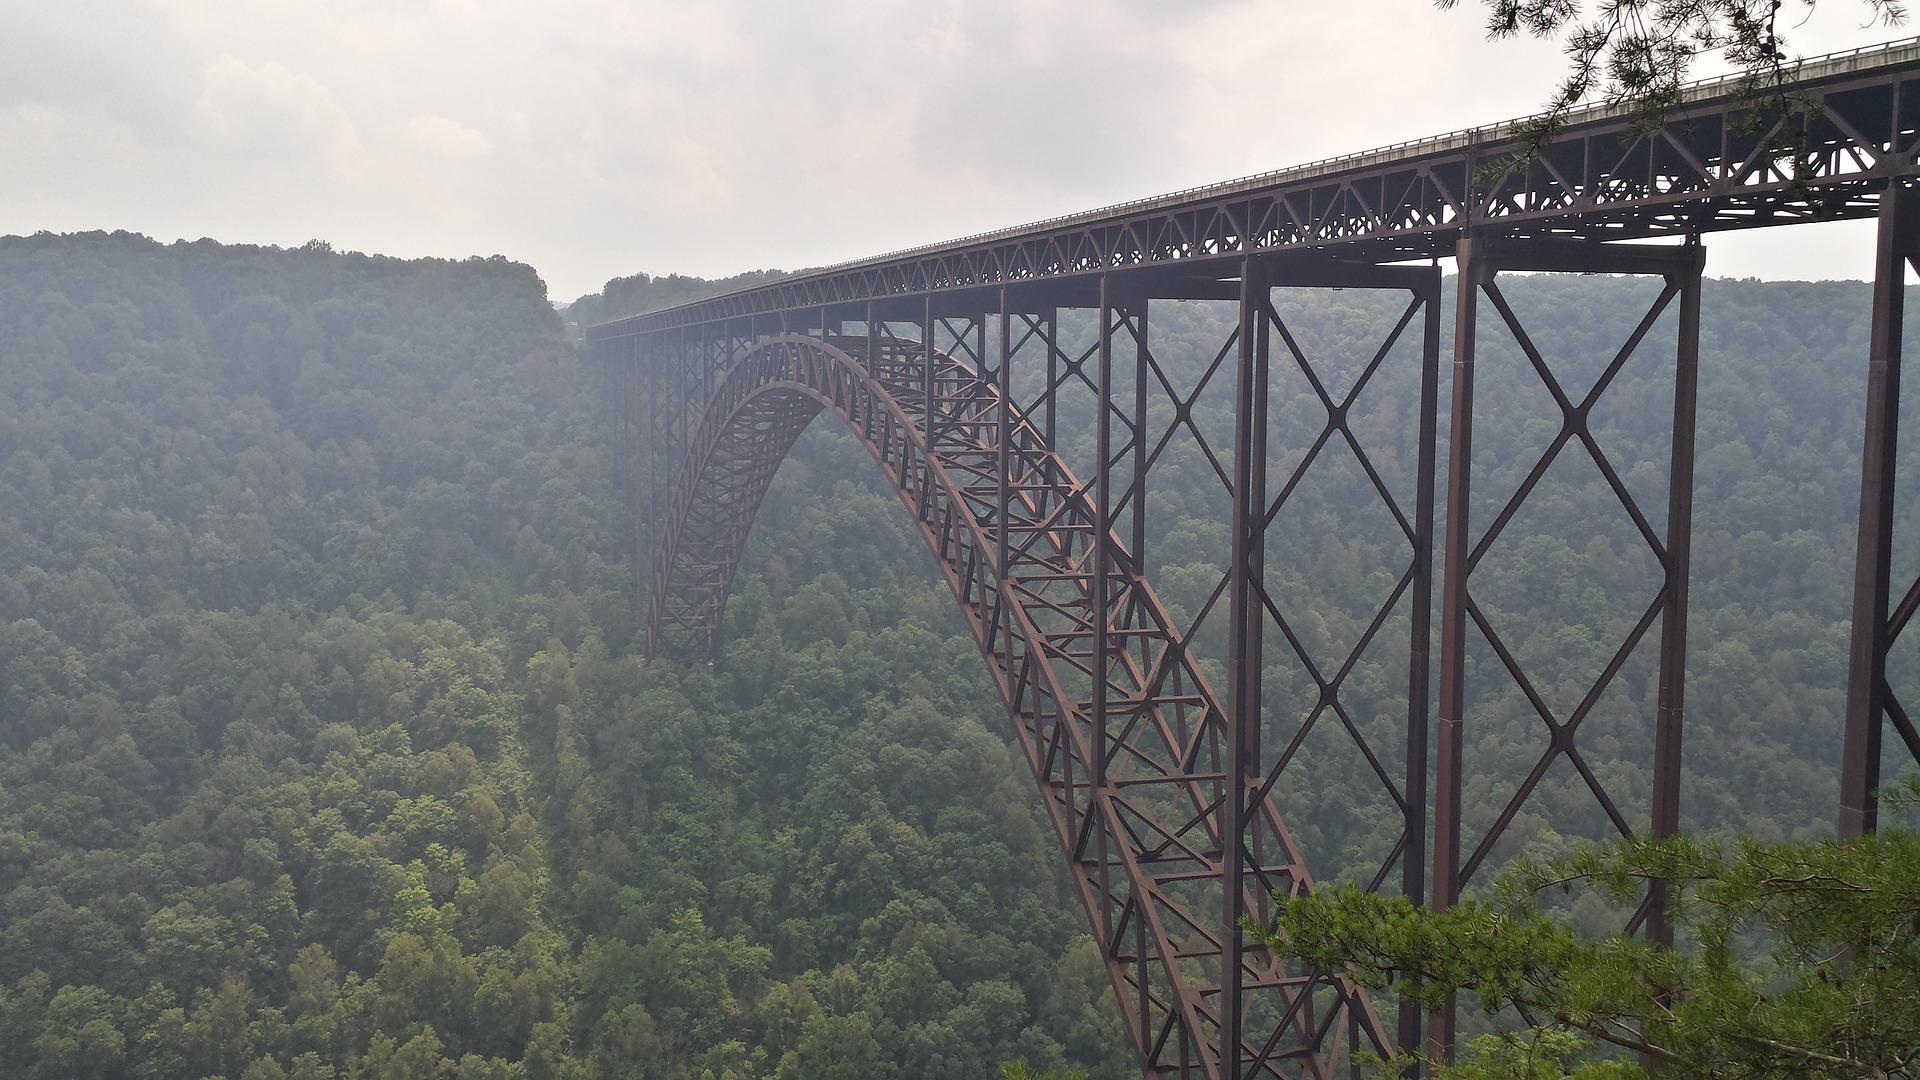 Take the Car and Check Out These 3 Best Views Near Nitro WV